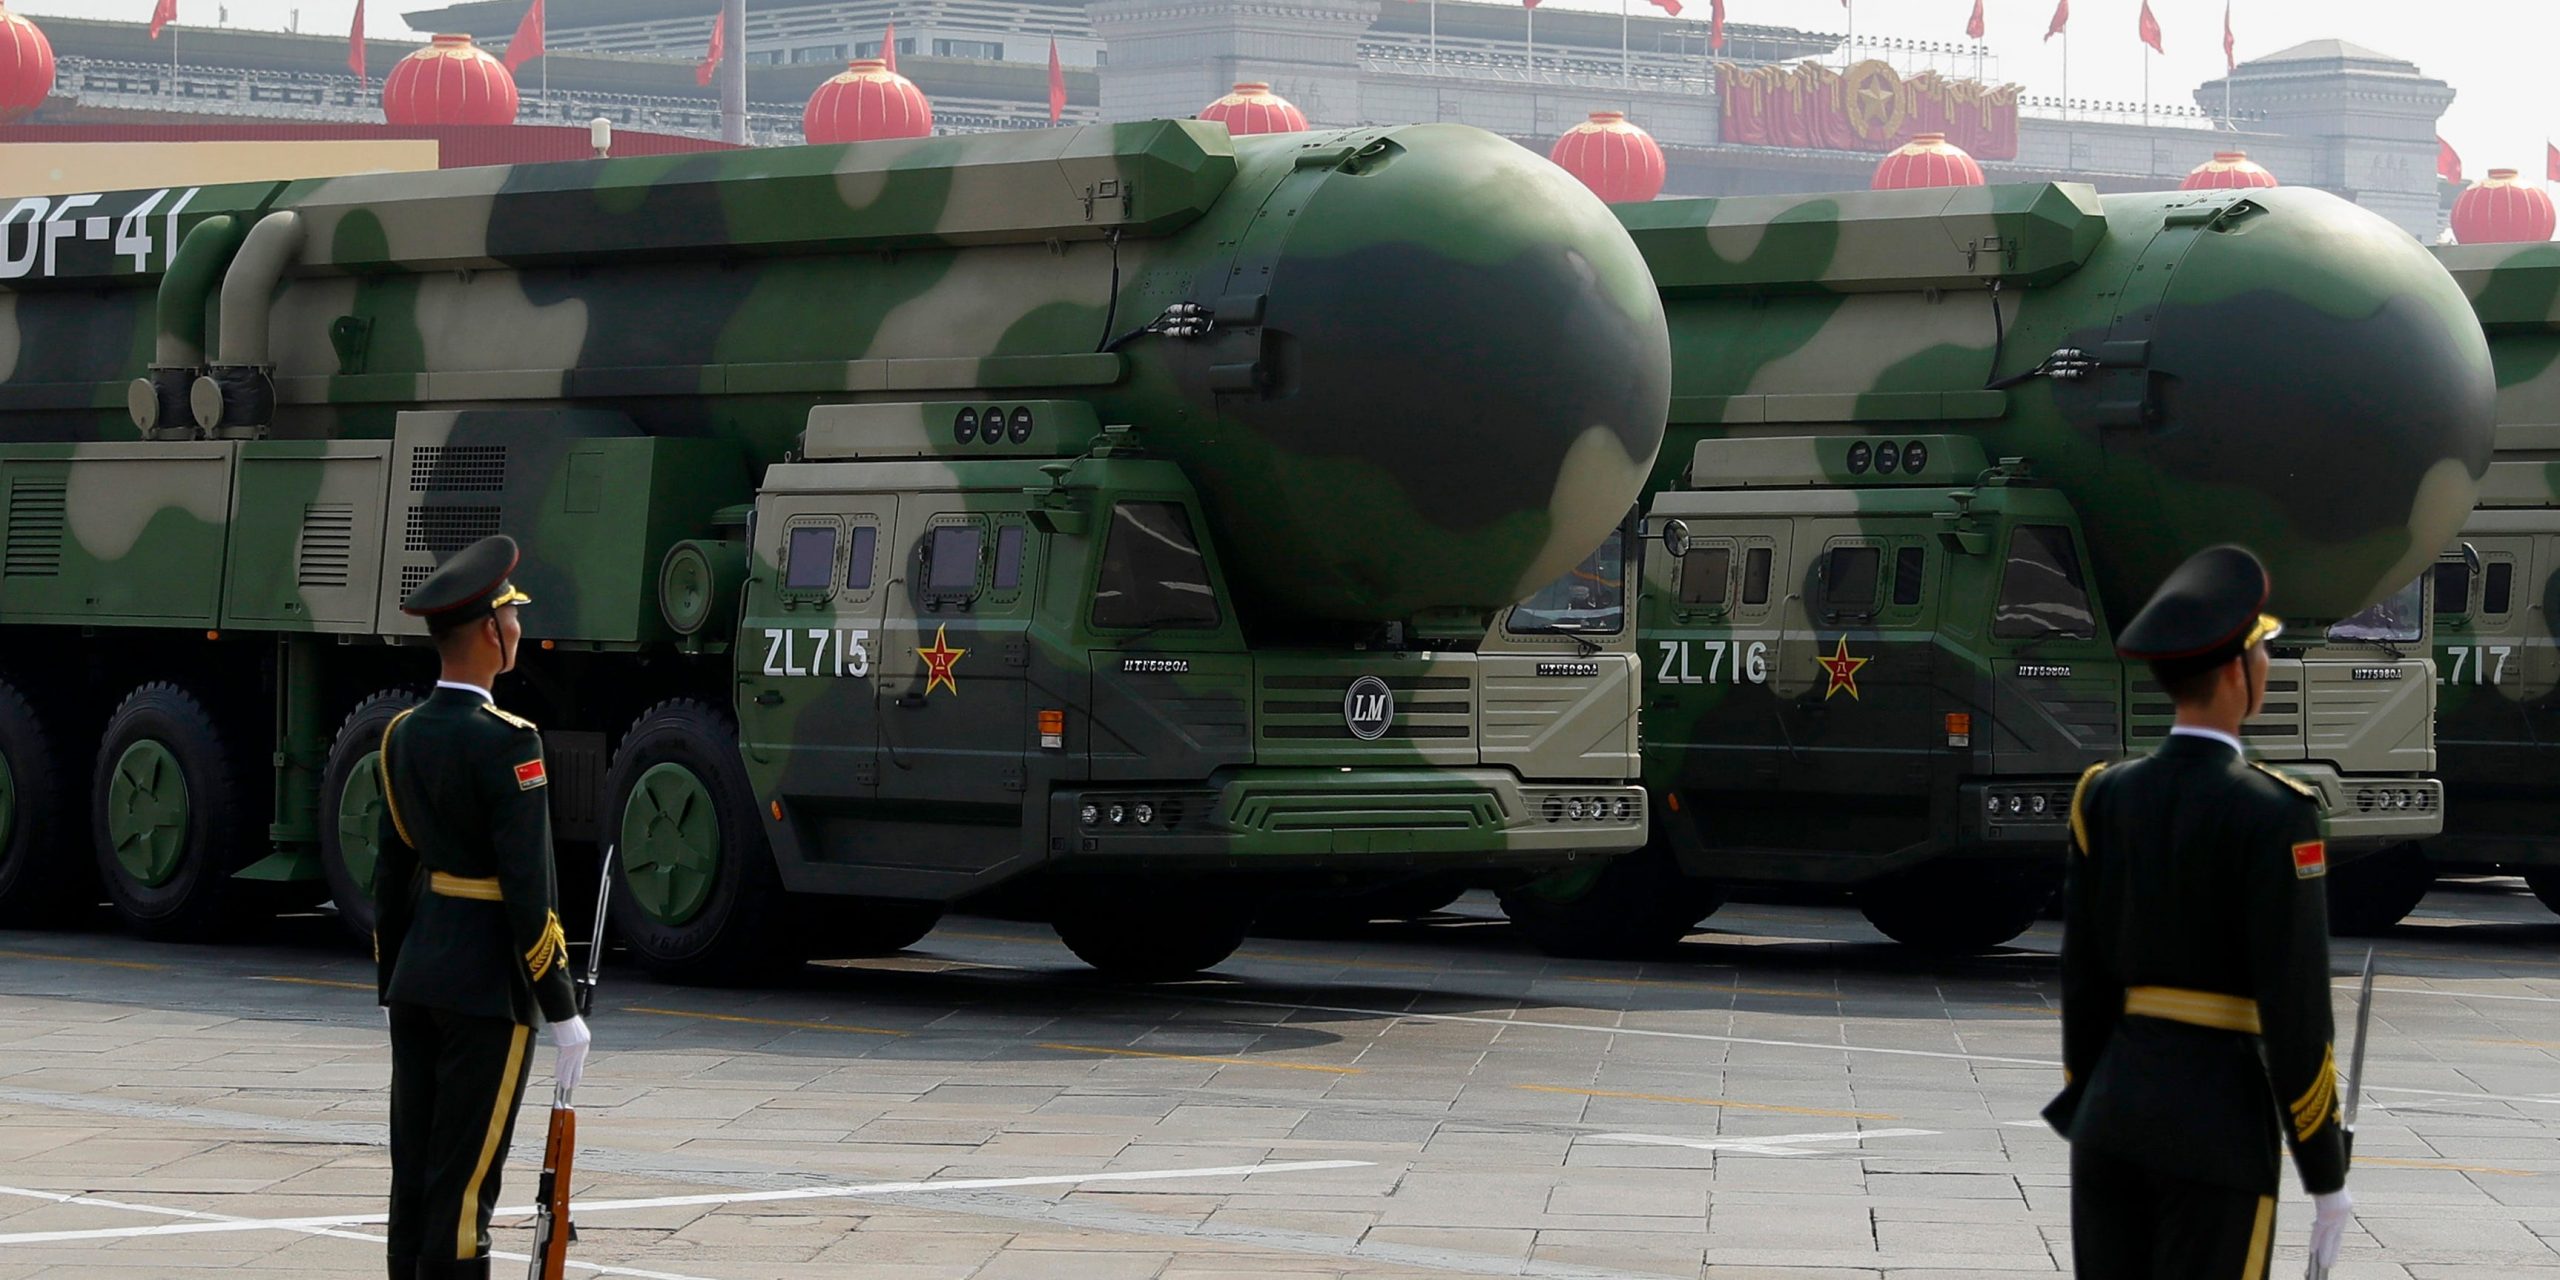 Chinese military vehicles carrying DF-41 ballistic missiles